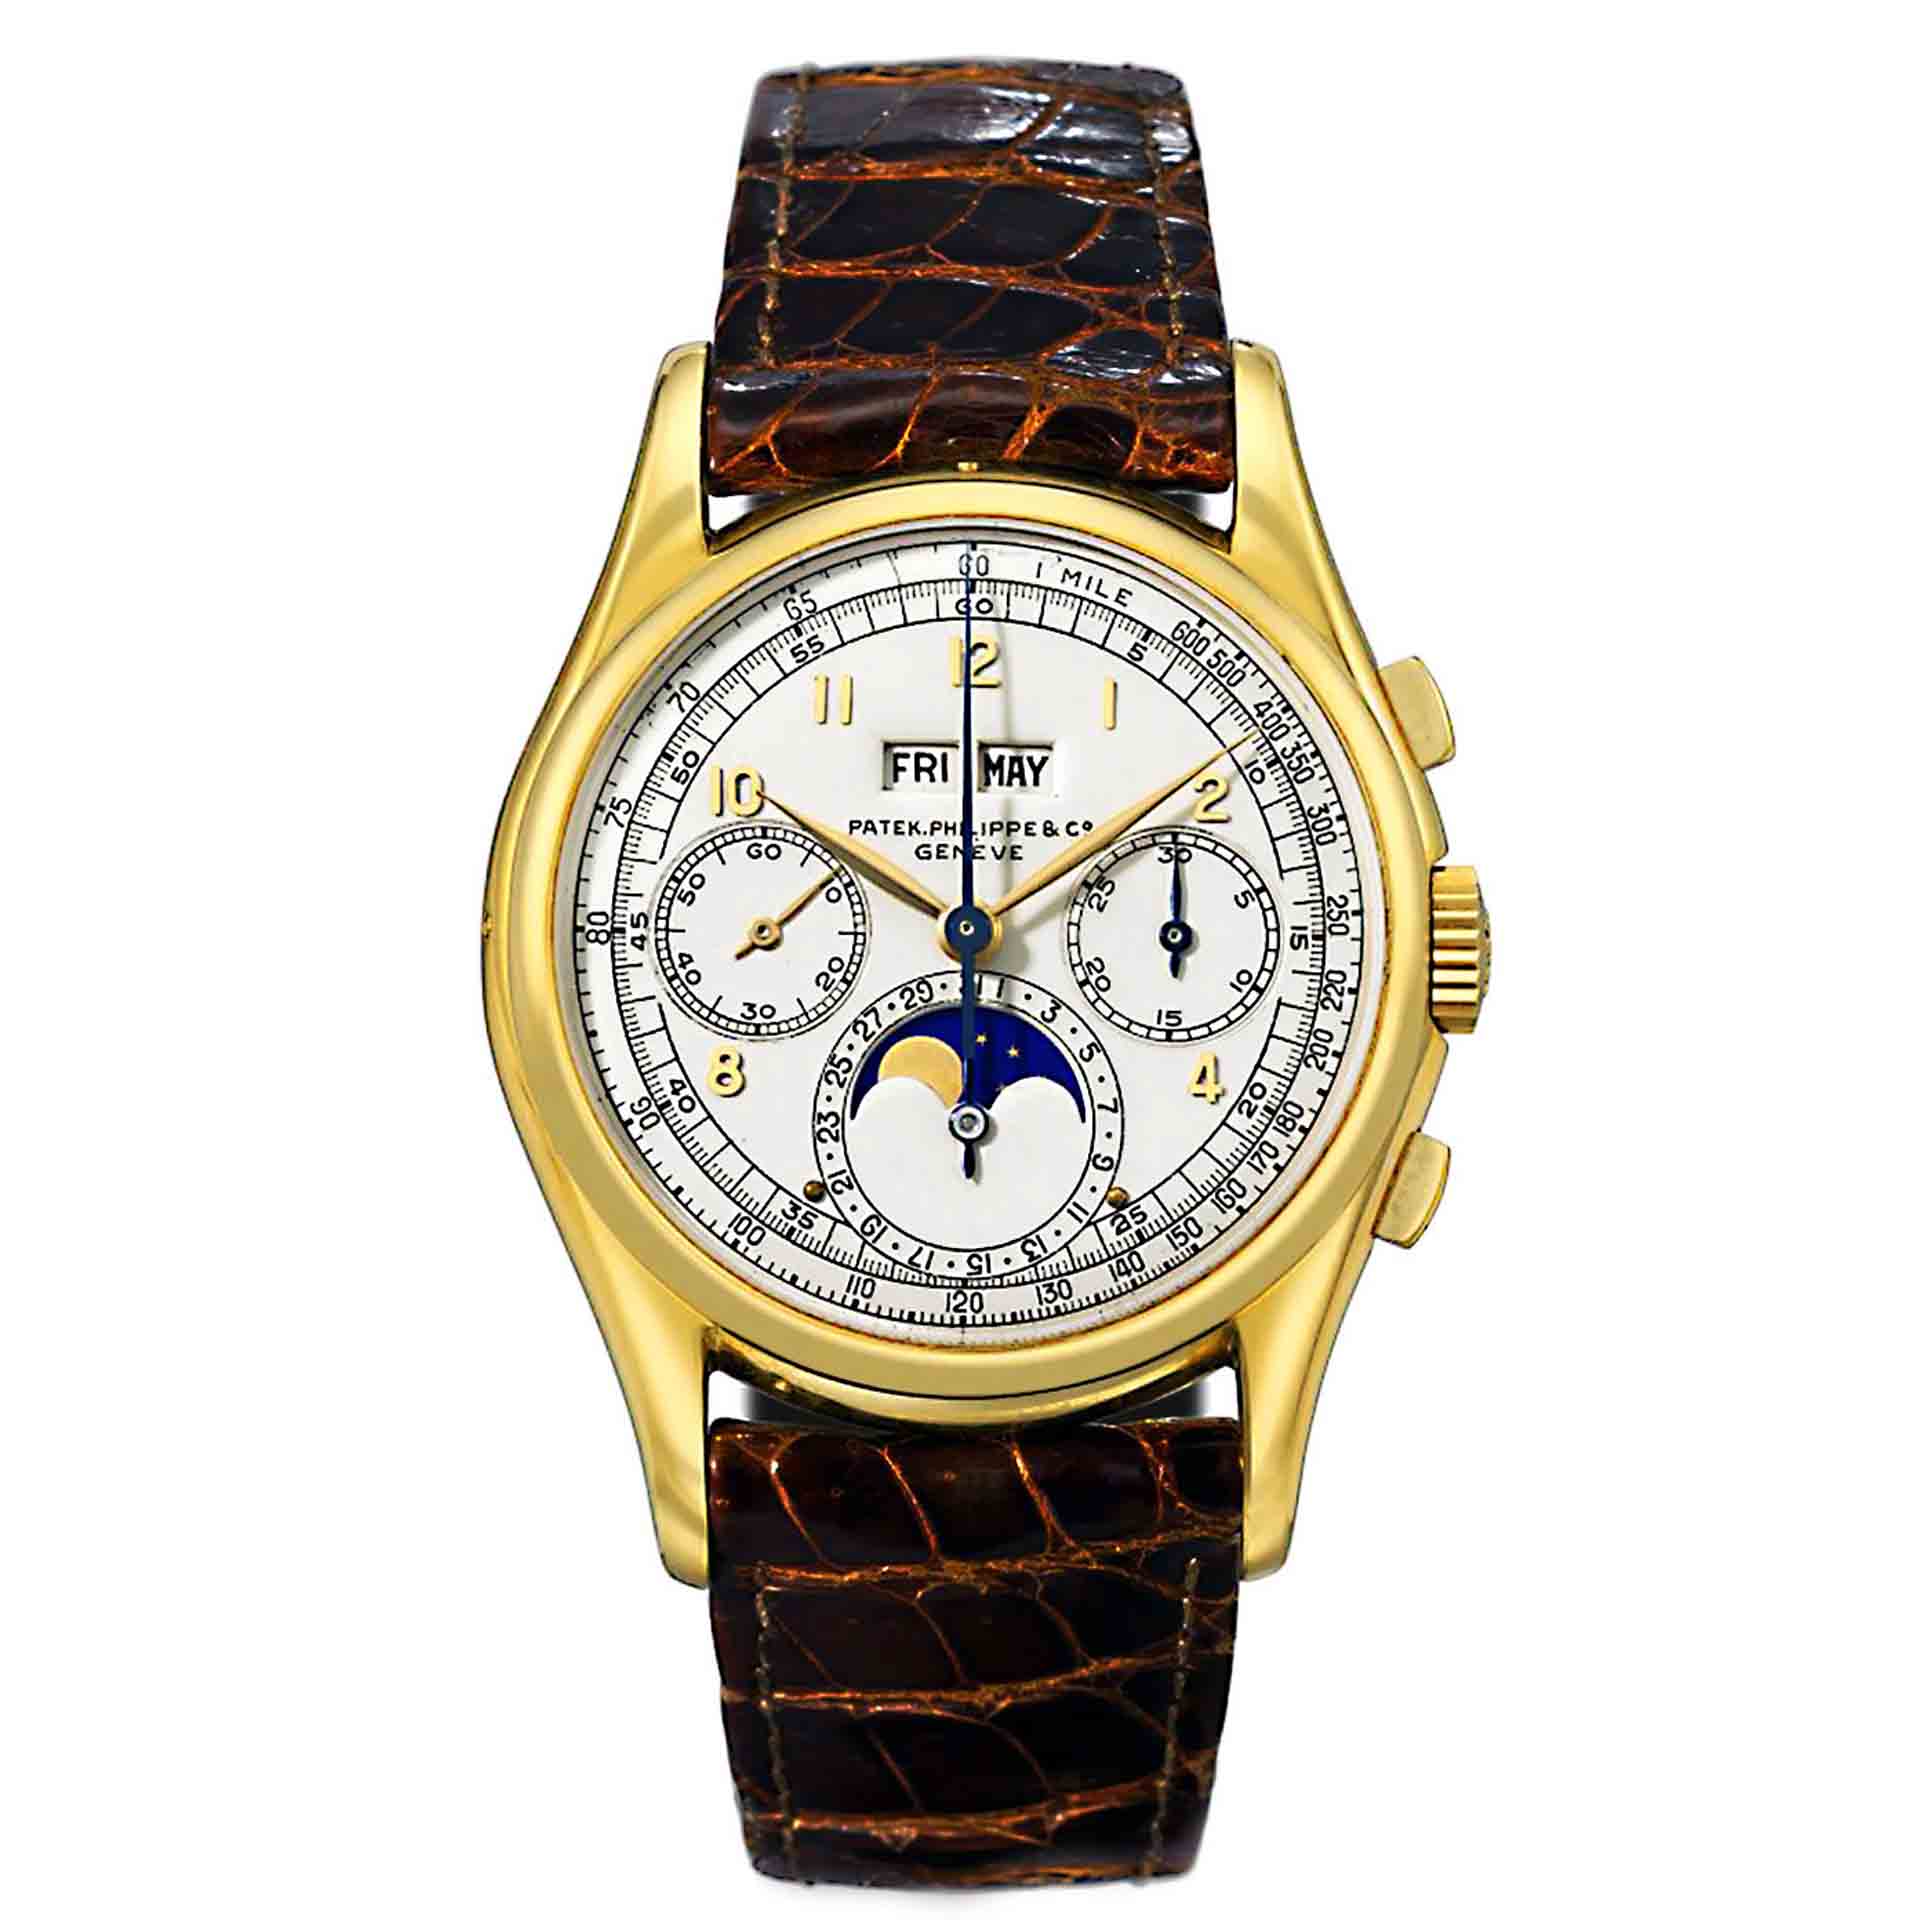 Patek Philippe Ref. 1527 - most expensive watch in the world